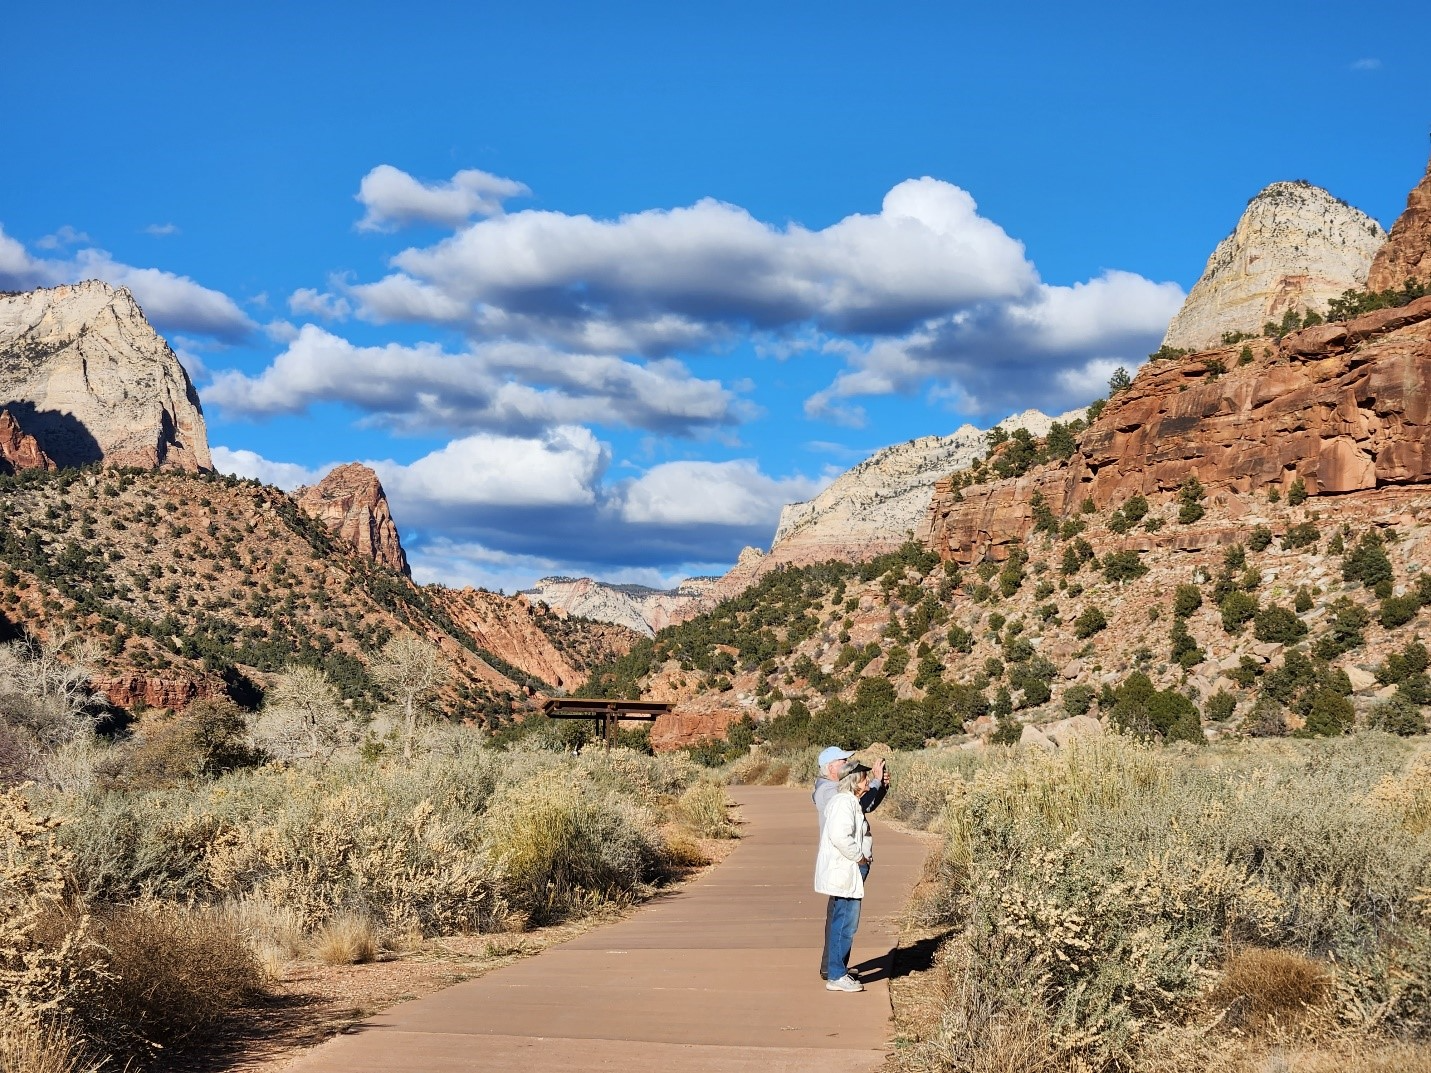 Visitors stand on paved trail with sandstone, foliage, and blue sky and clouds in the background